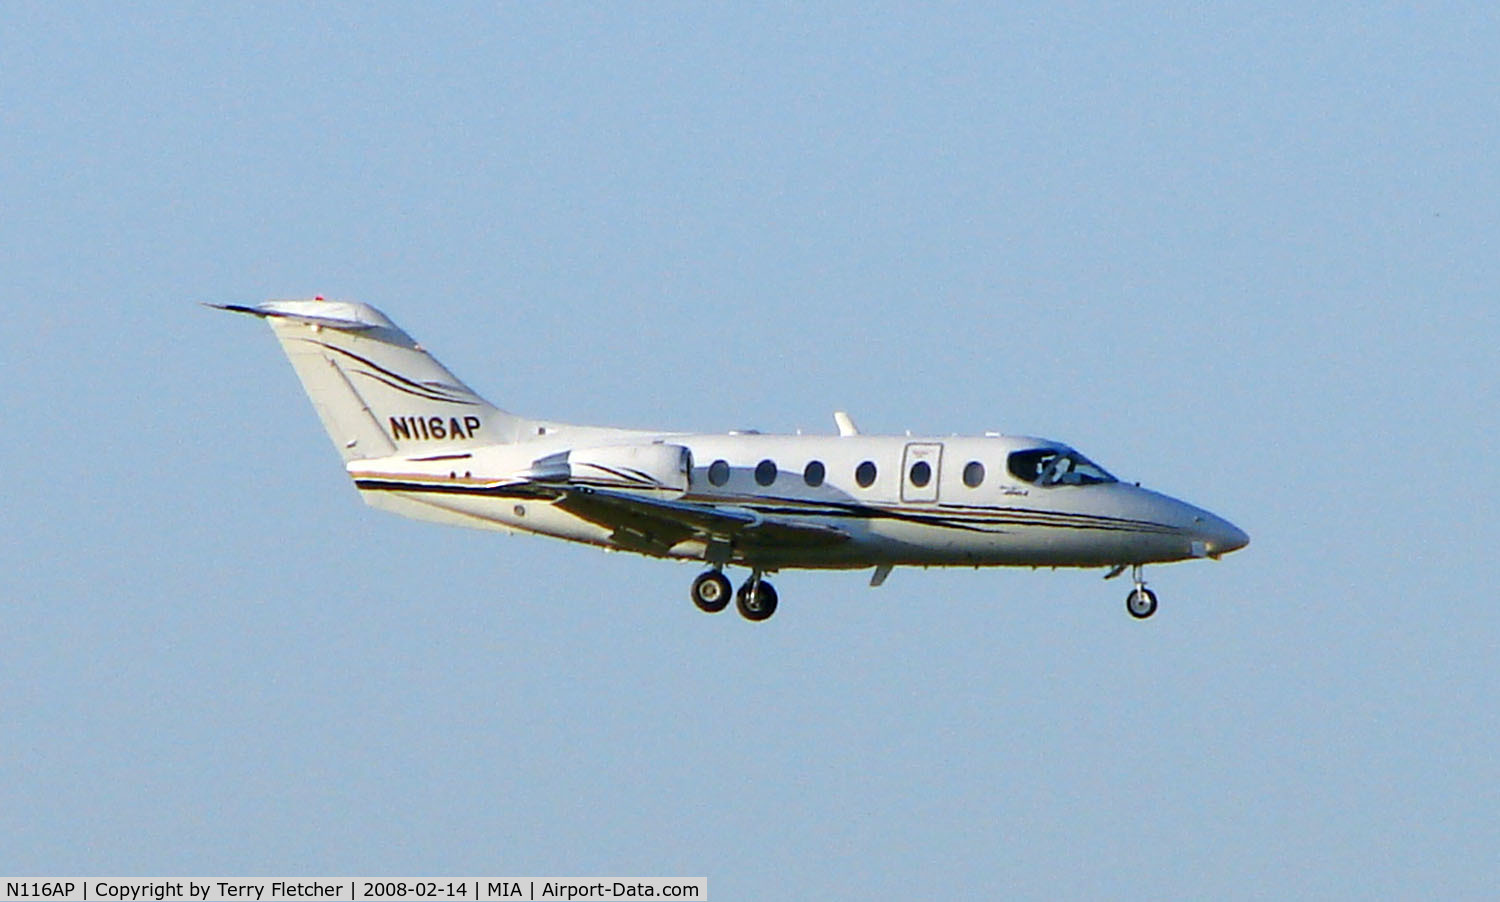 N116AP, 1998 Raytheon 400A Beechjet C/N RK-192, Yet another Beechjet 400 inbound to Miami